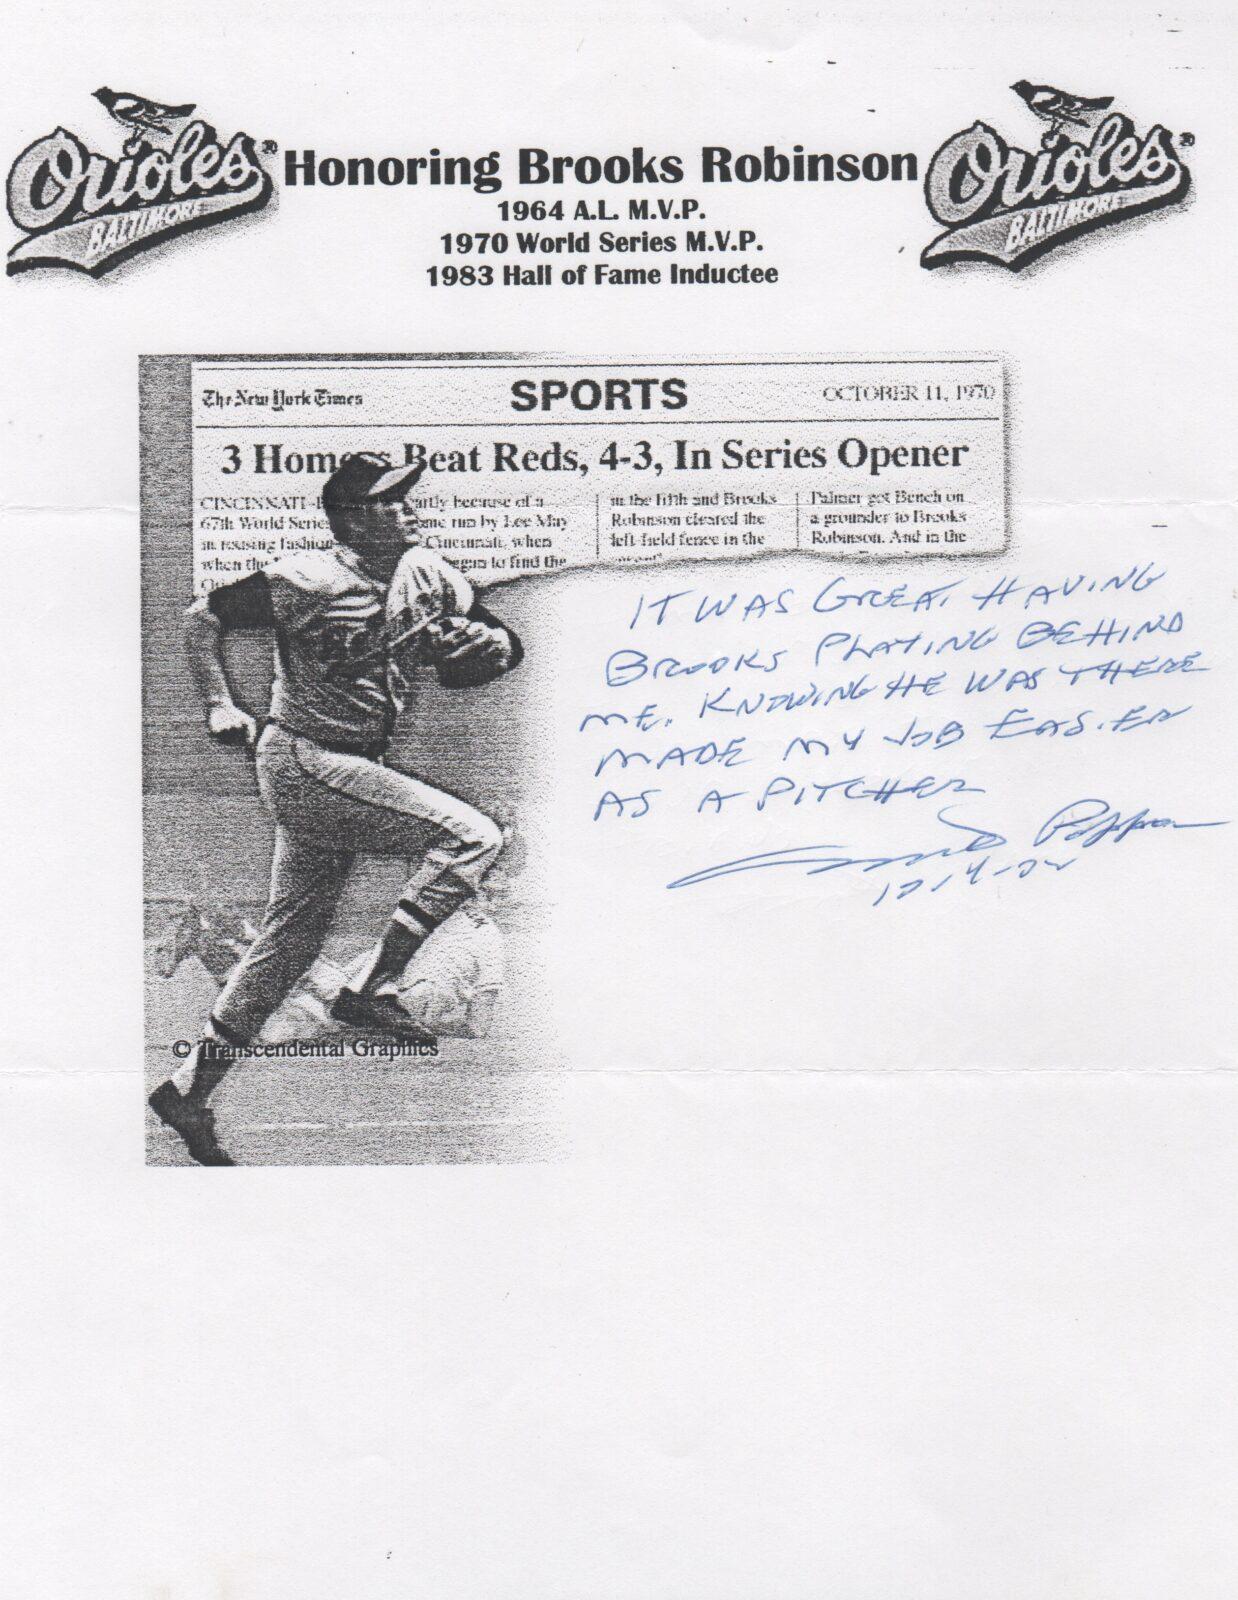 A message from Orioles Hall of Famer and 1983 World Series MVP